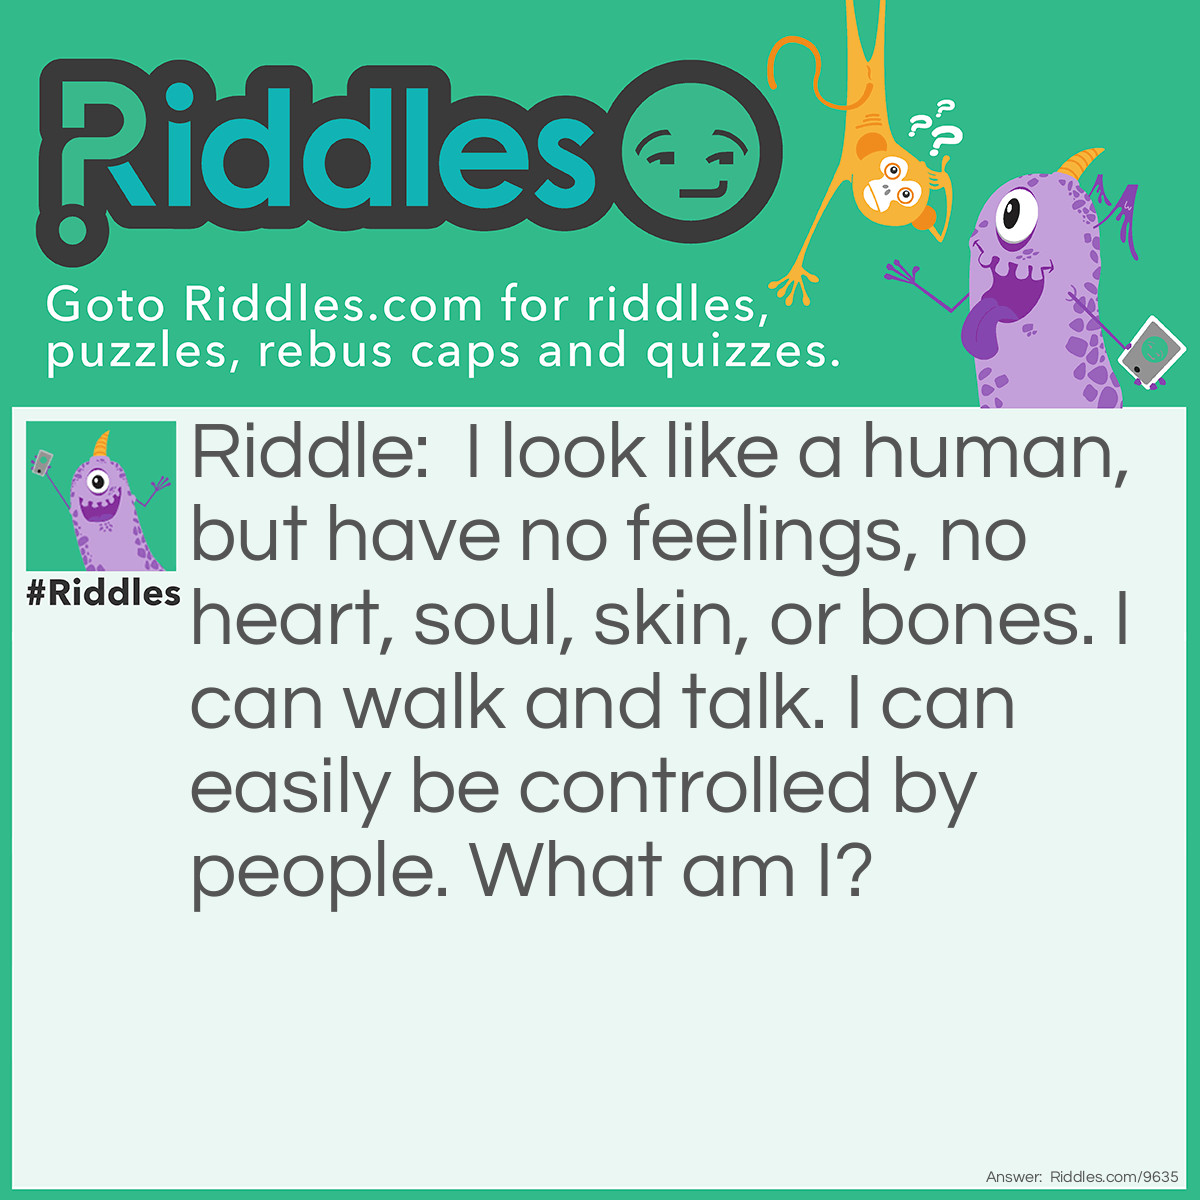 Riddle: I look like a human, but have no feelings, no heart, soul, skin, or bones. I can walk and talk. I can easily be controlled by people. What am I? Answer: Artificial Intelligence, or a robot.